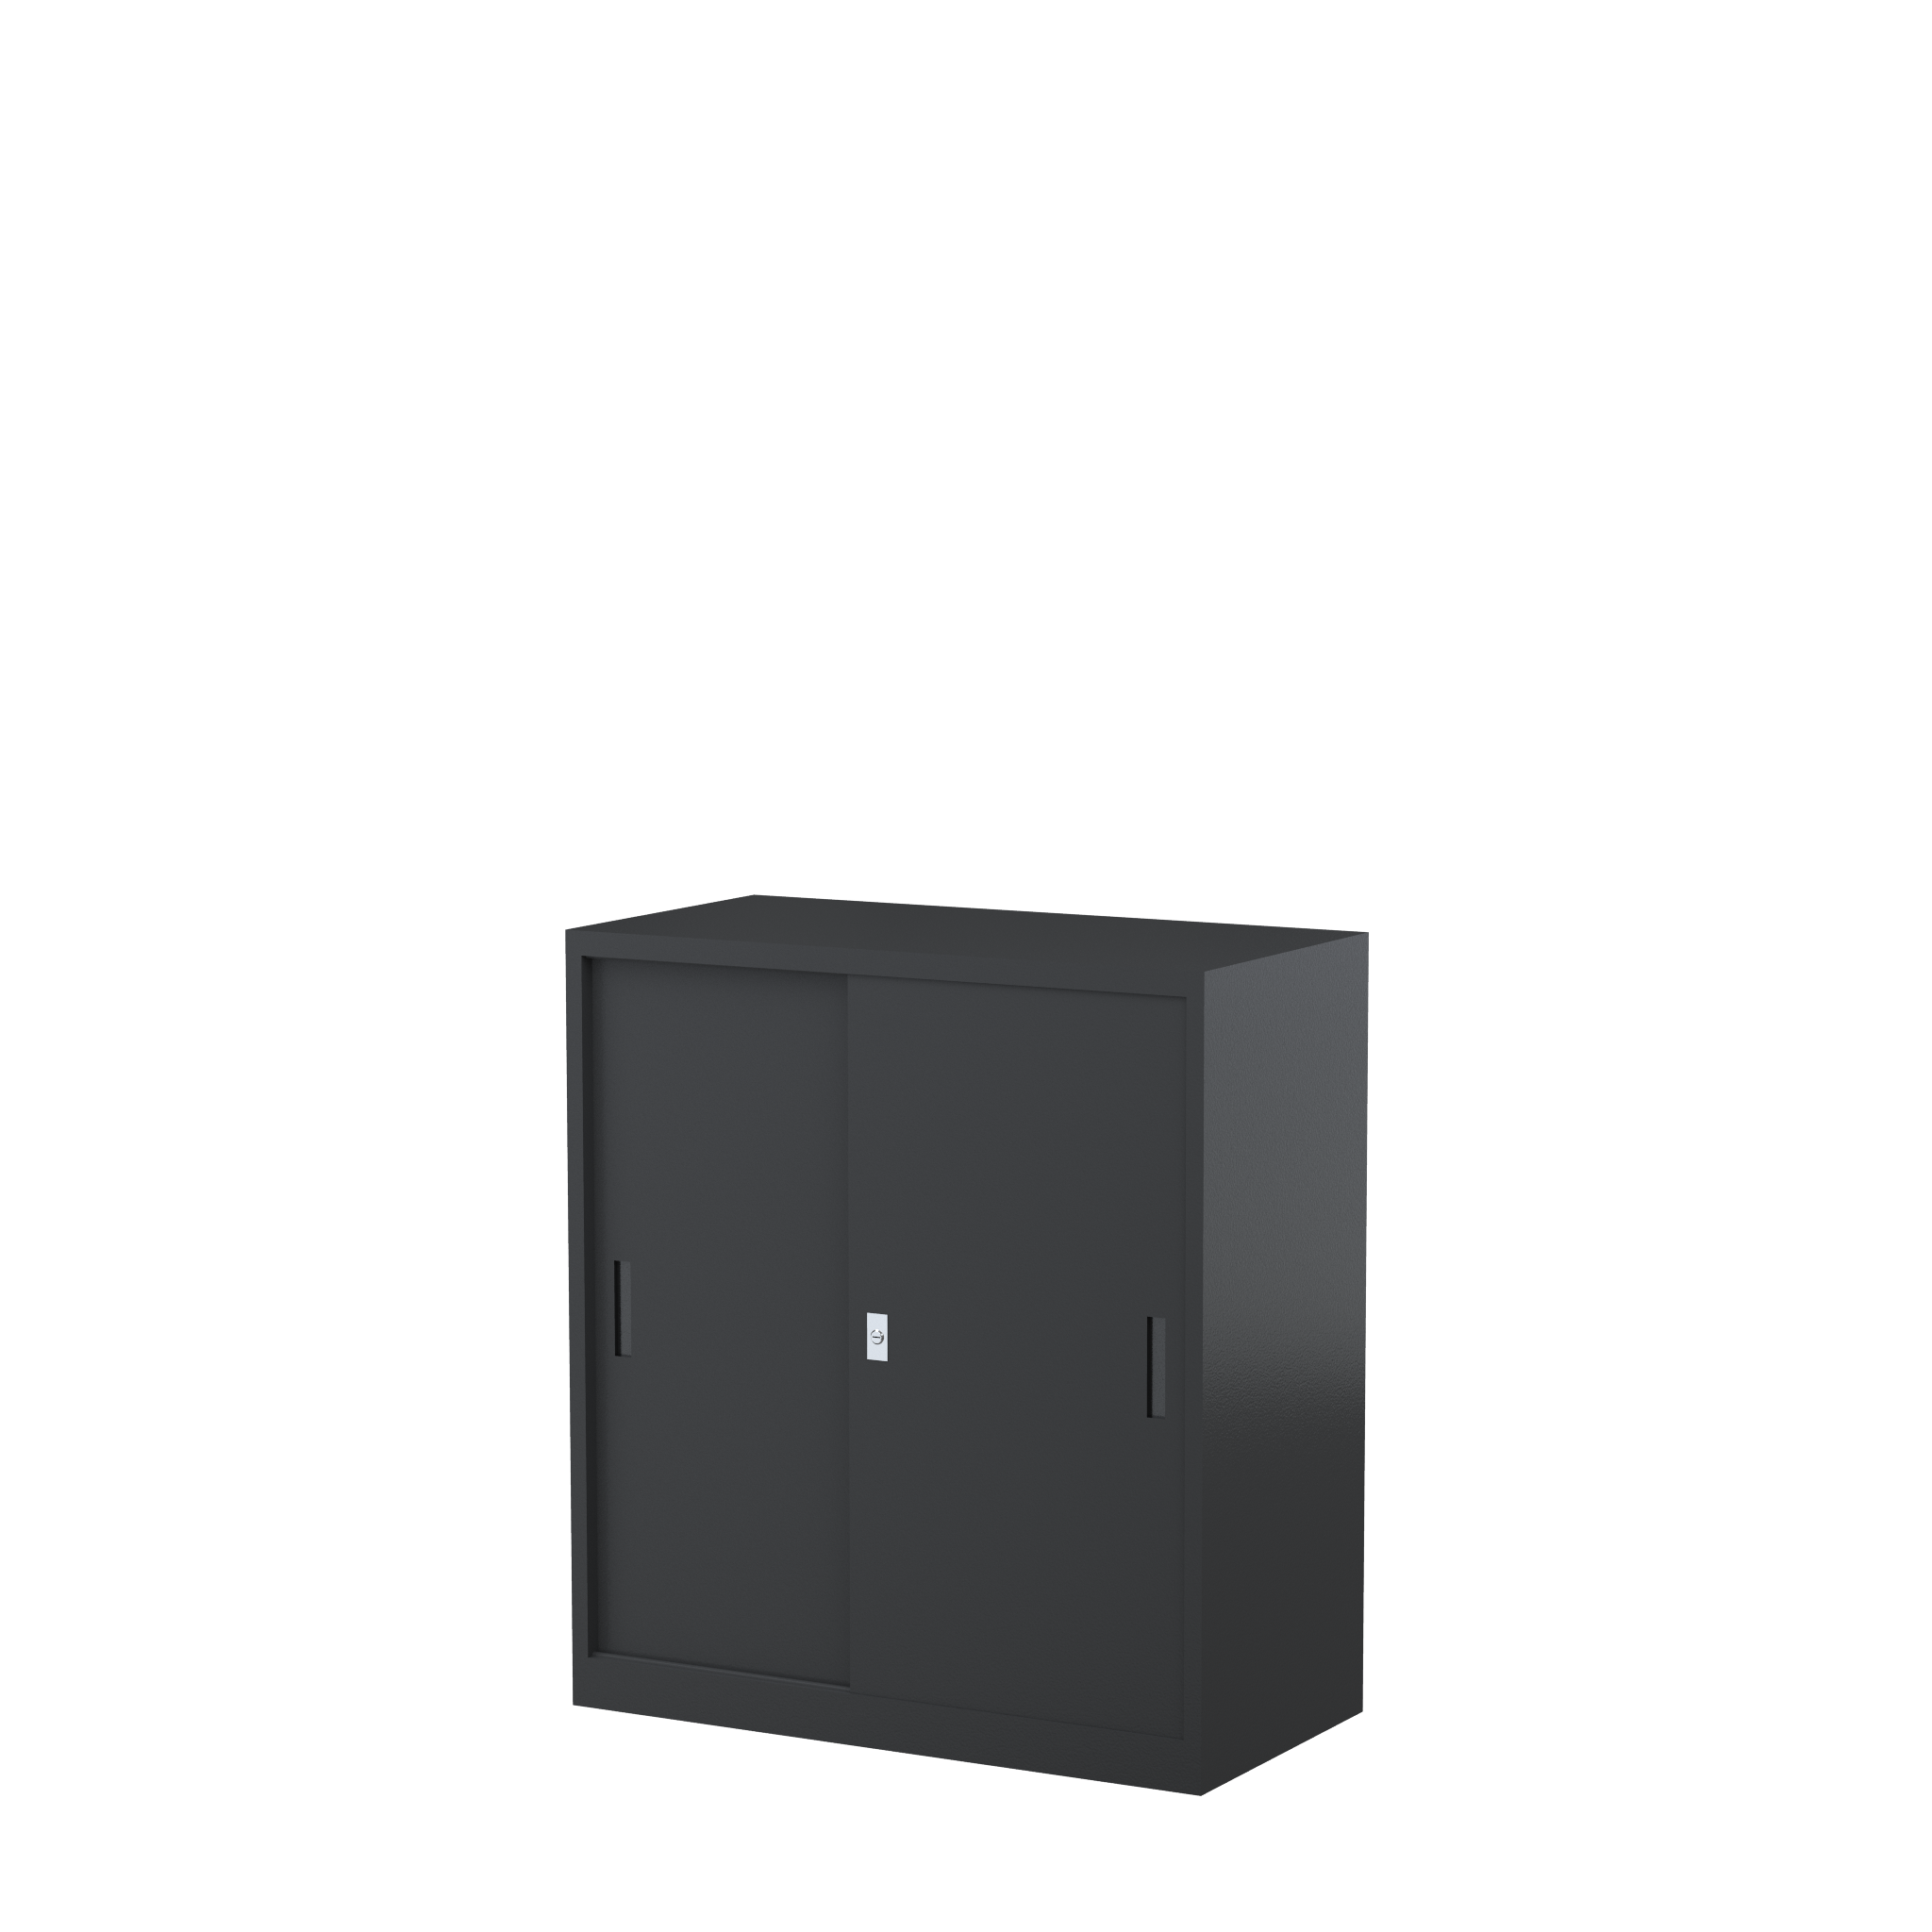 SD1015_914 - STEELCO SS Cabinet 1015H x 914W x 465D - 2 Shelves-GR.png